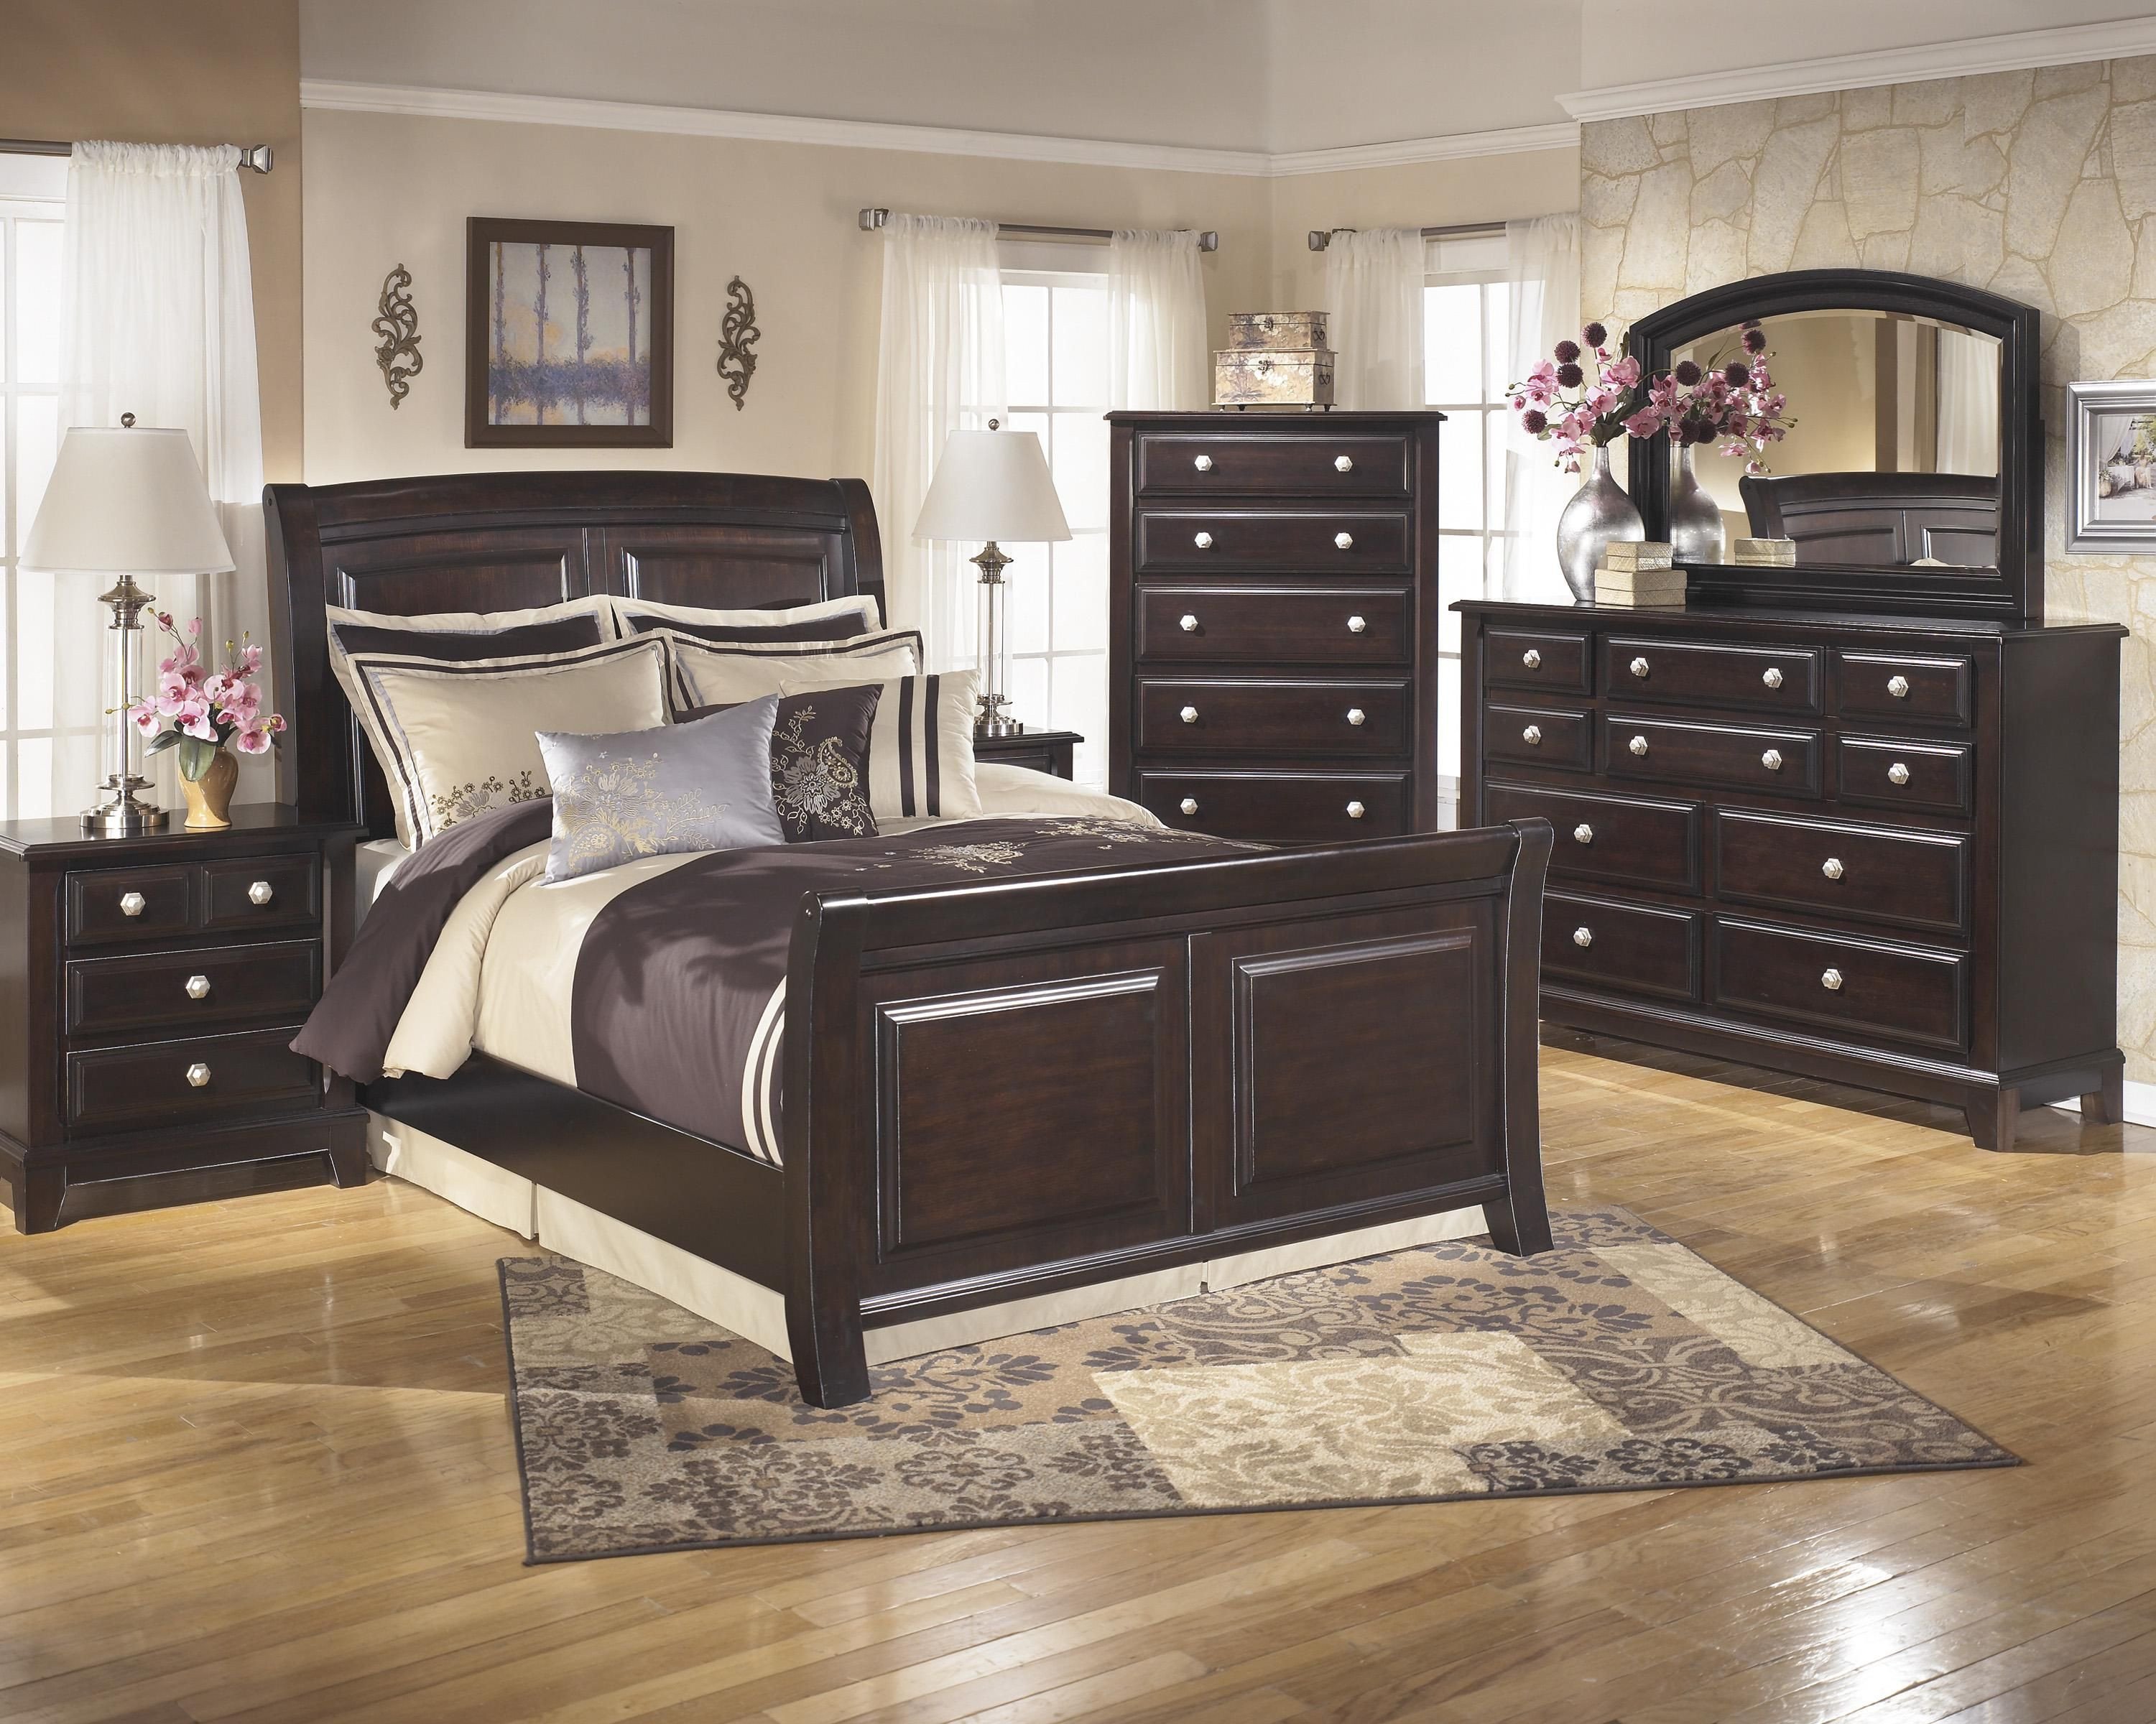 Ashley Queen Bedroom Set Lovely Ridgley King Bedroom Group by Signature Design by ashley